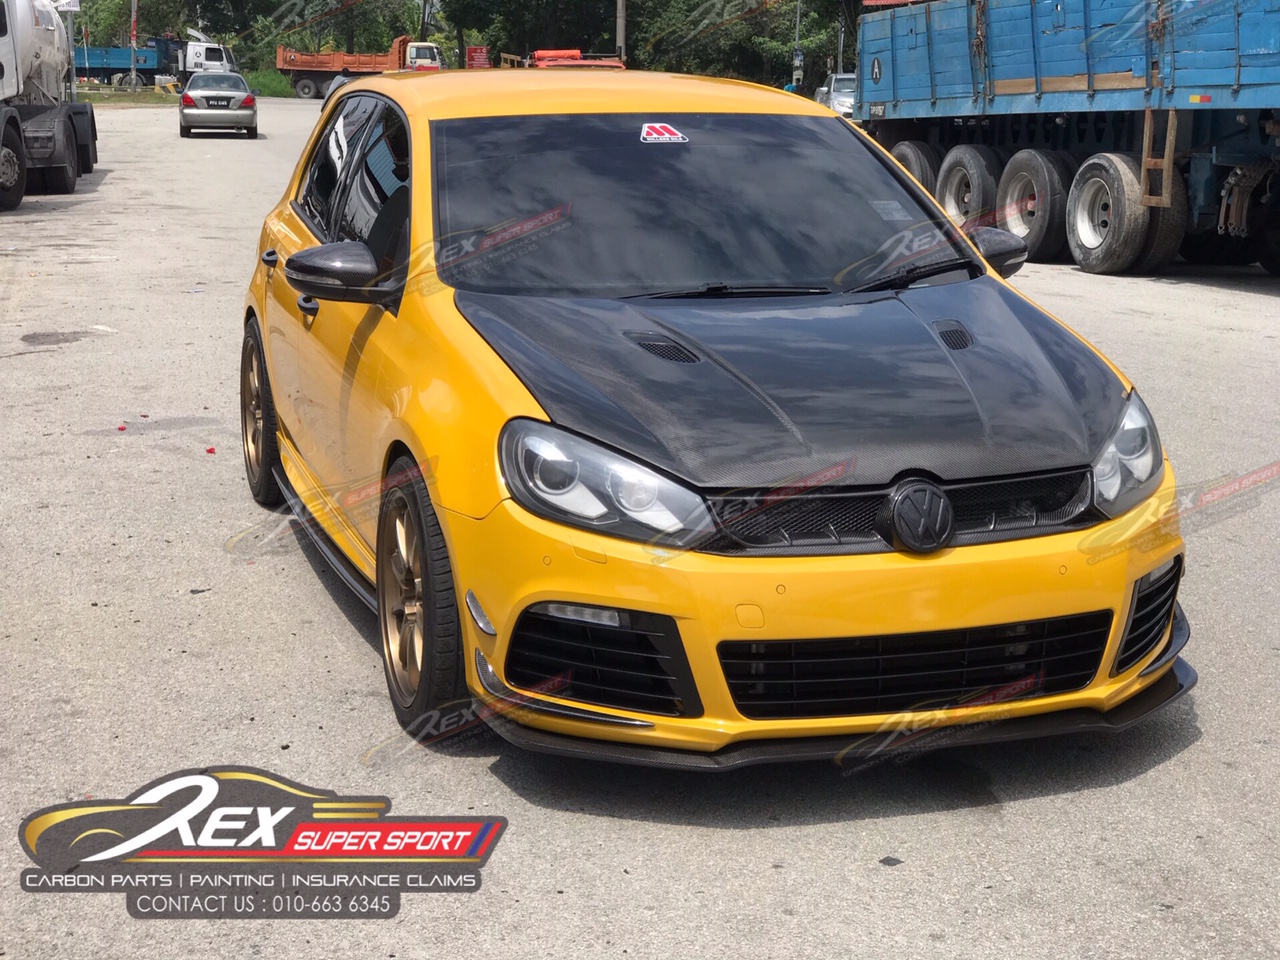 Golf Mk6 R Front Canard Carbon Rexsupersport Specializes In Providing Carbon Fibre Parts And Accessories